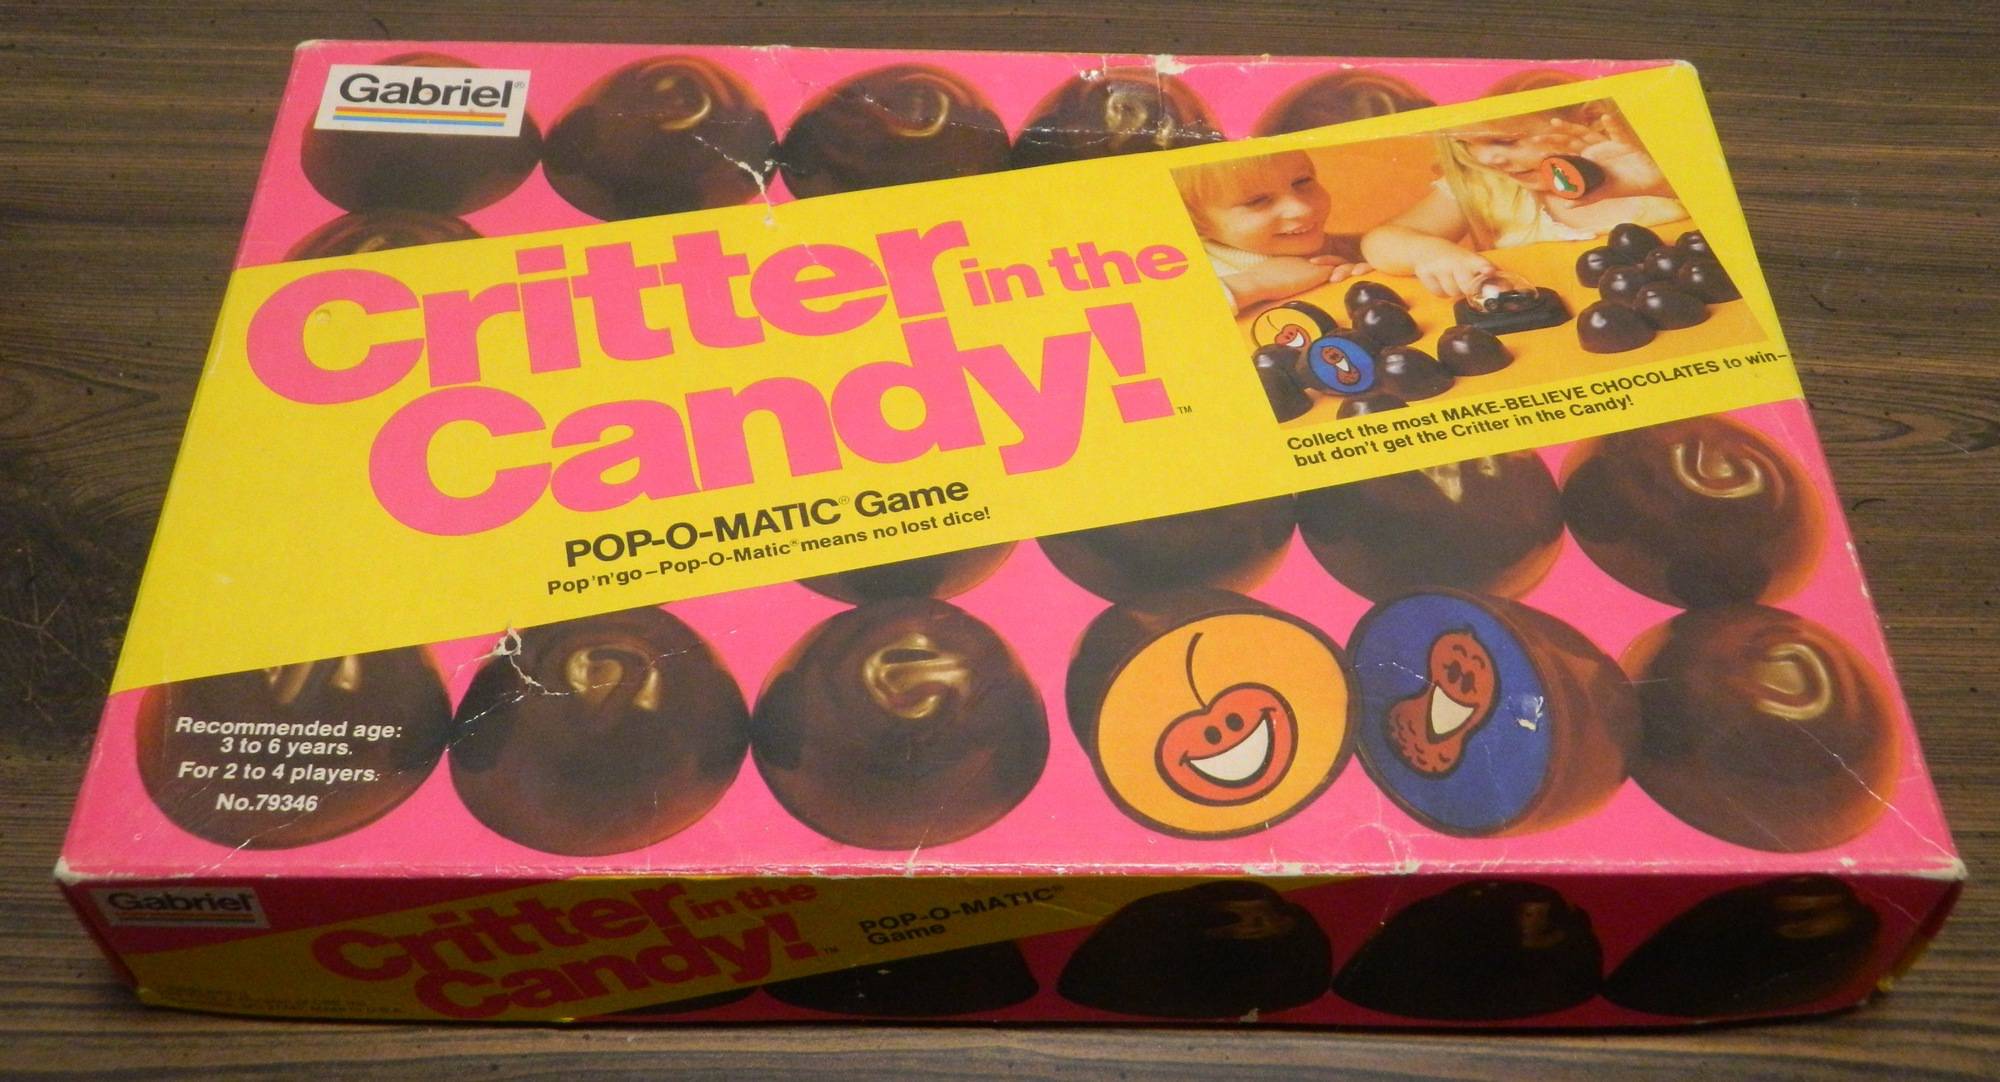 Box for Critter in the Candy